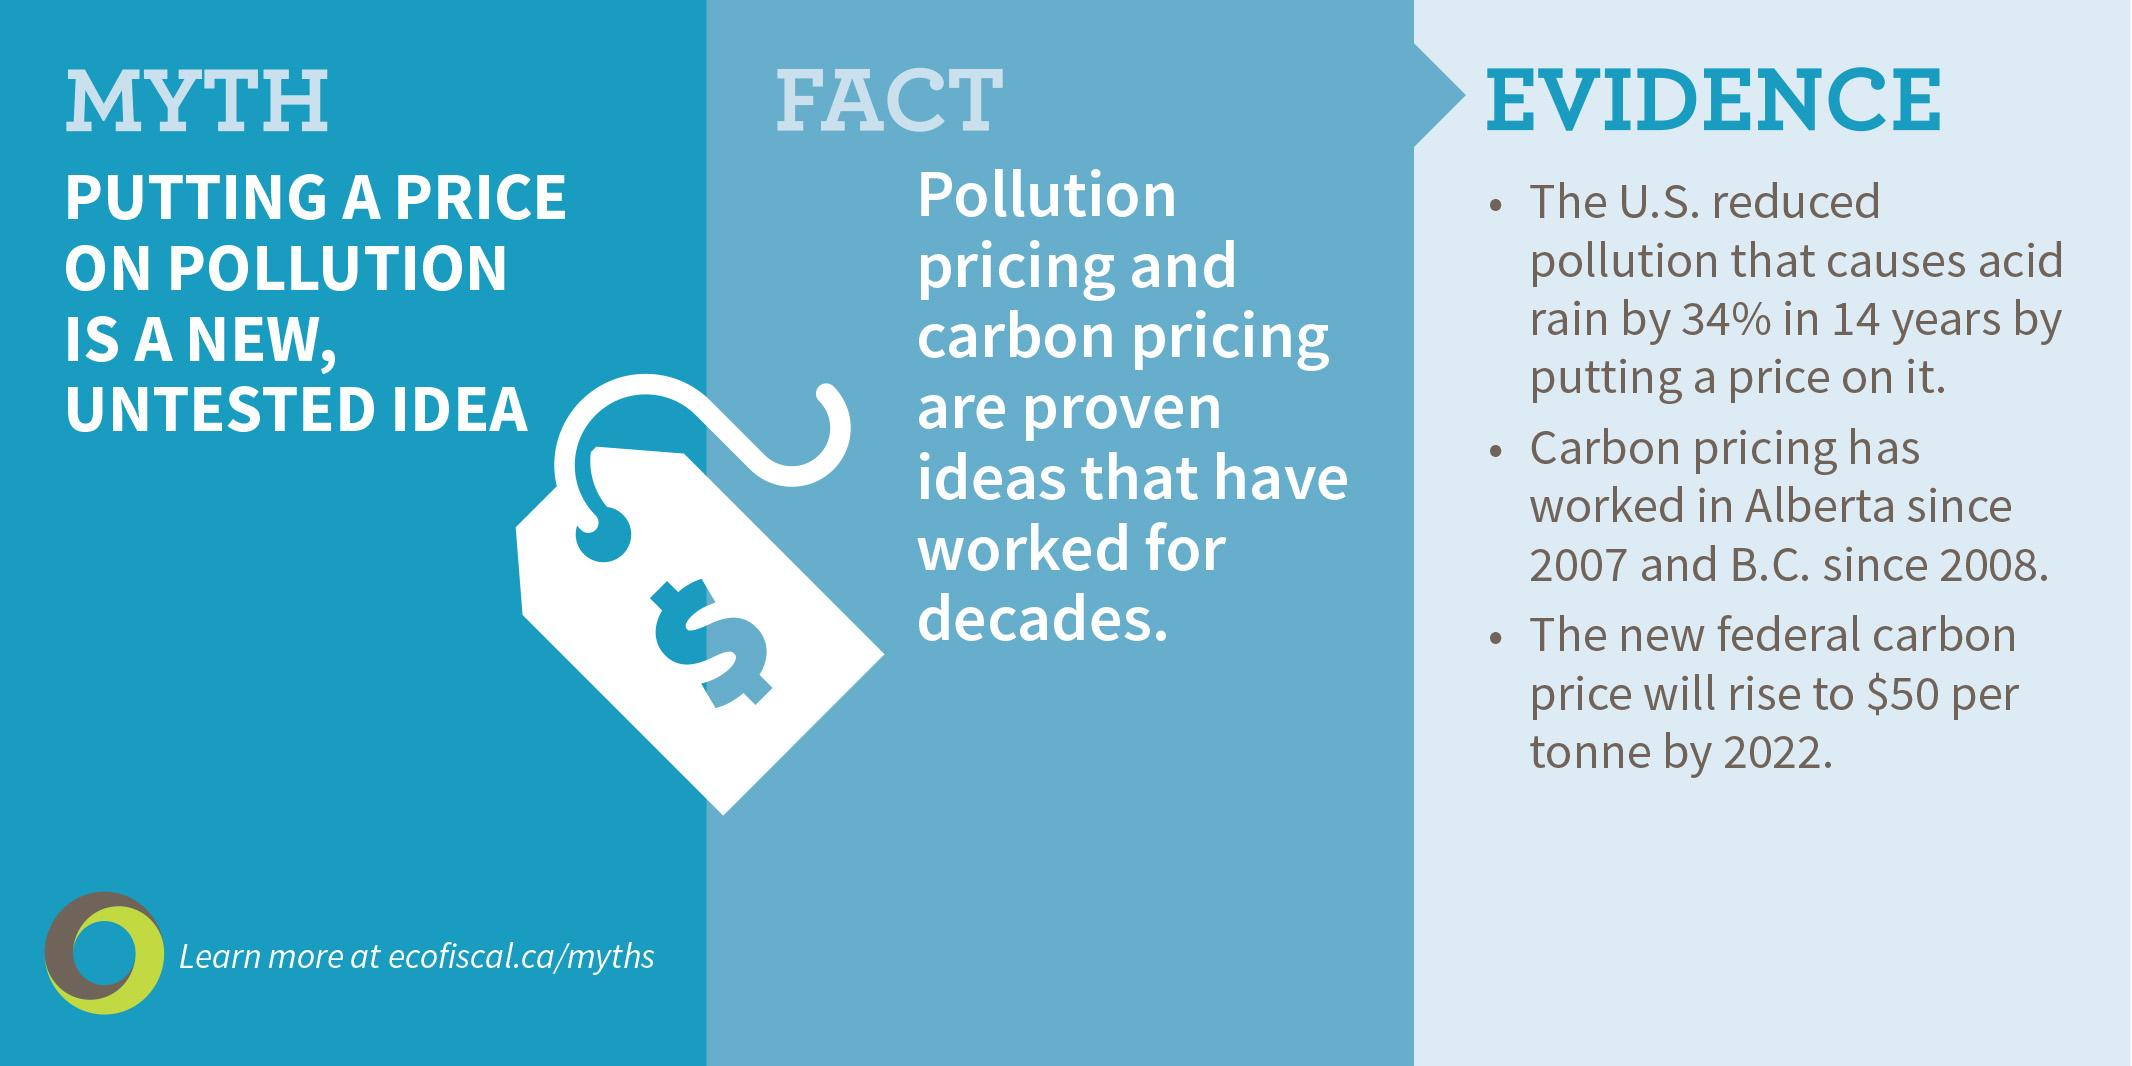 Myth #1: Putting a price on pollution is a new, untested idea